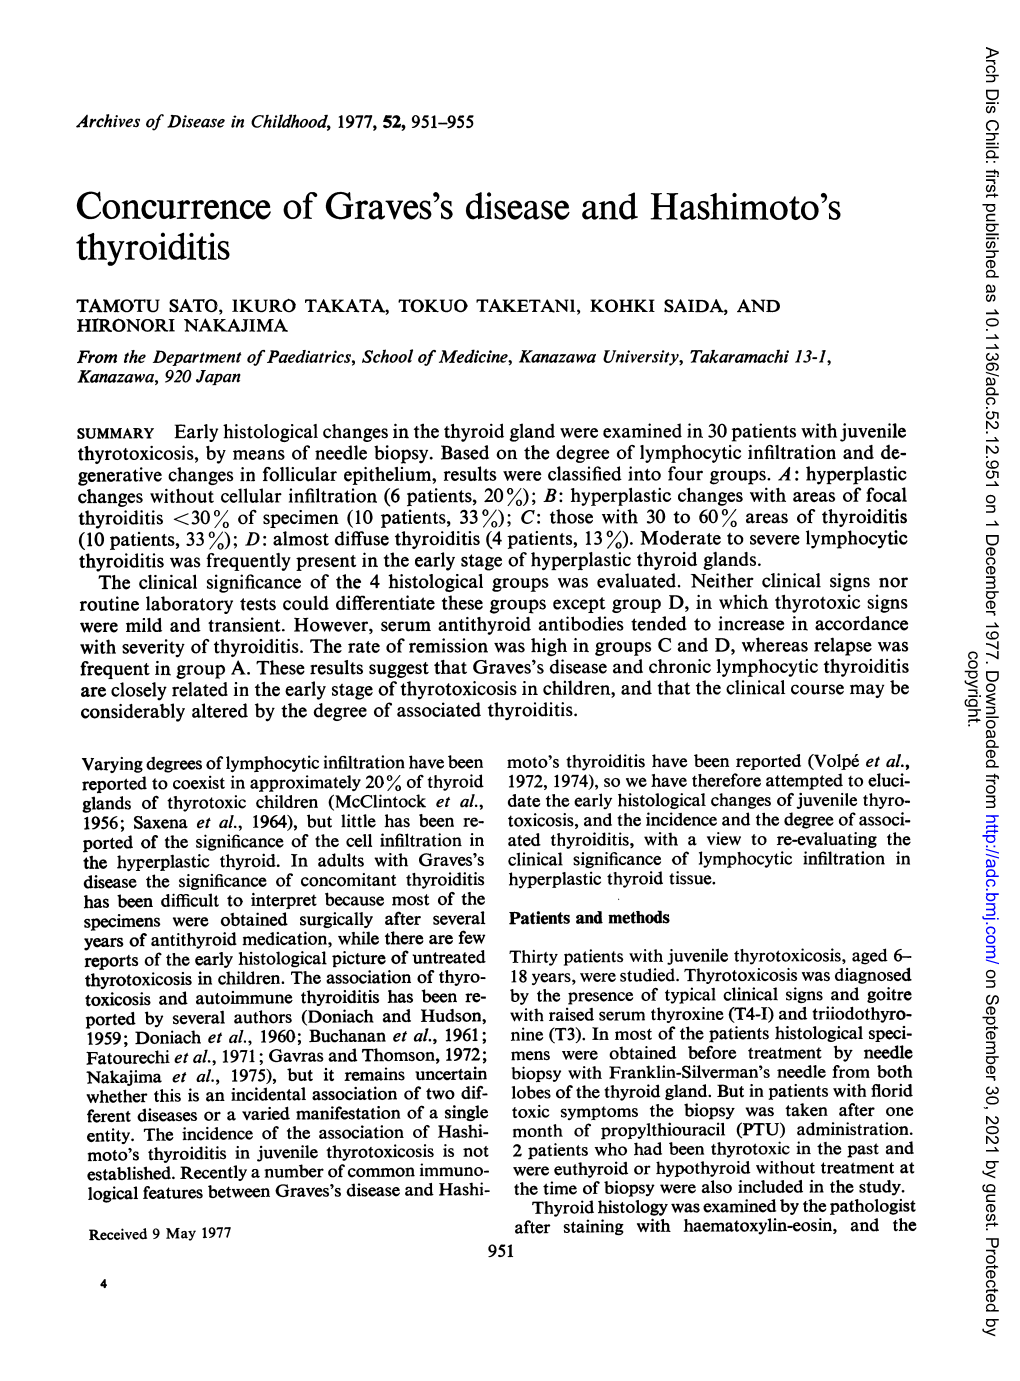 Concurrence of Graves's Disease and Hashimoto's Thyroiditis